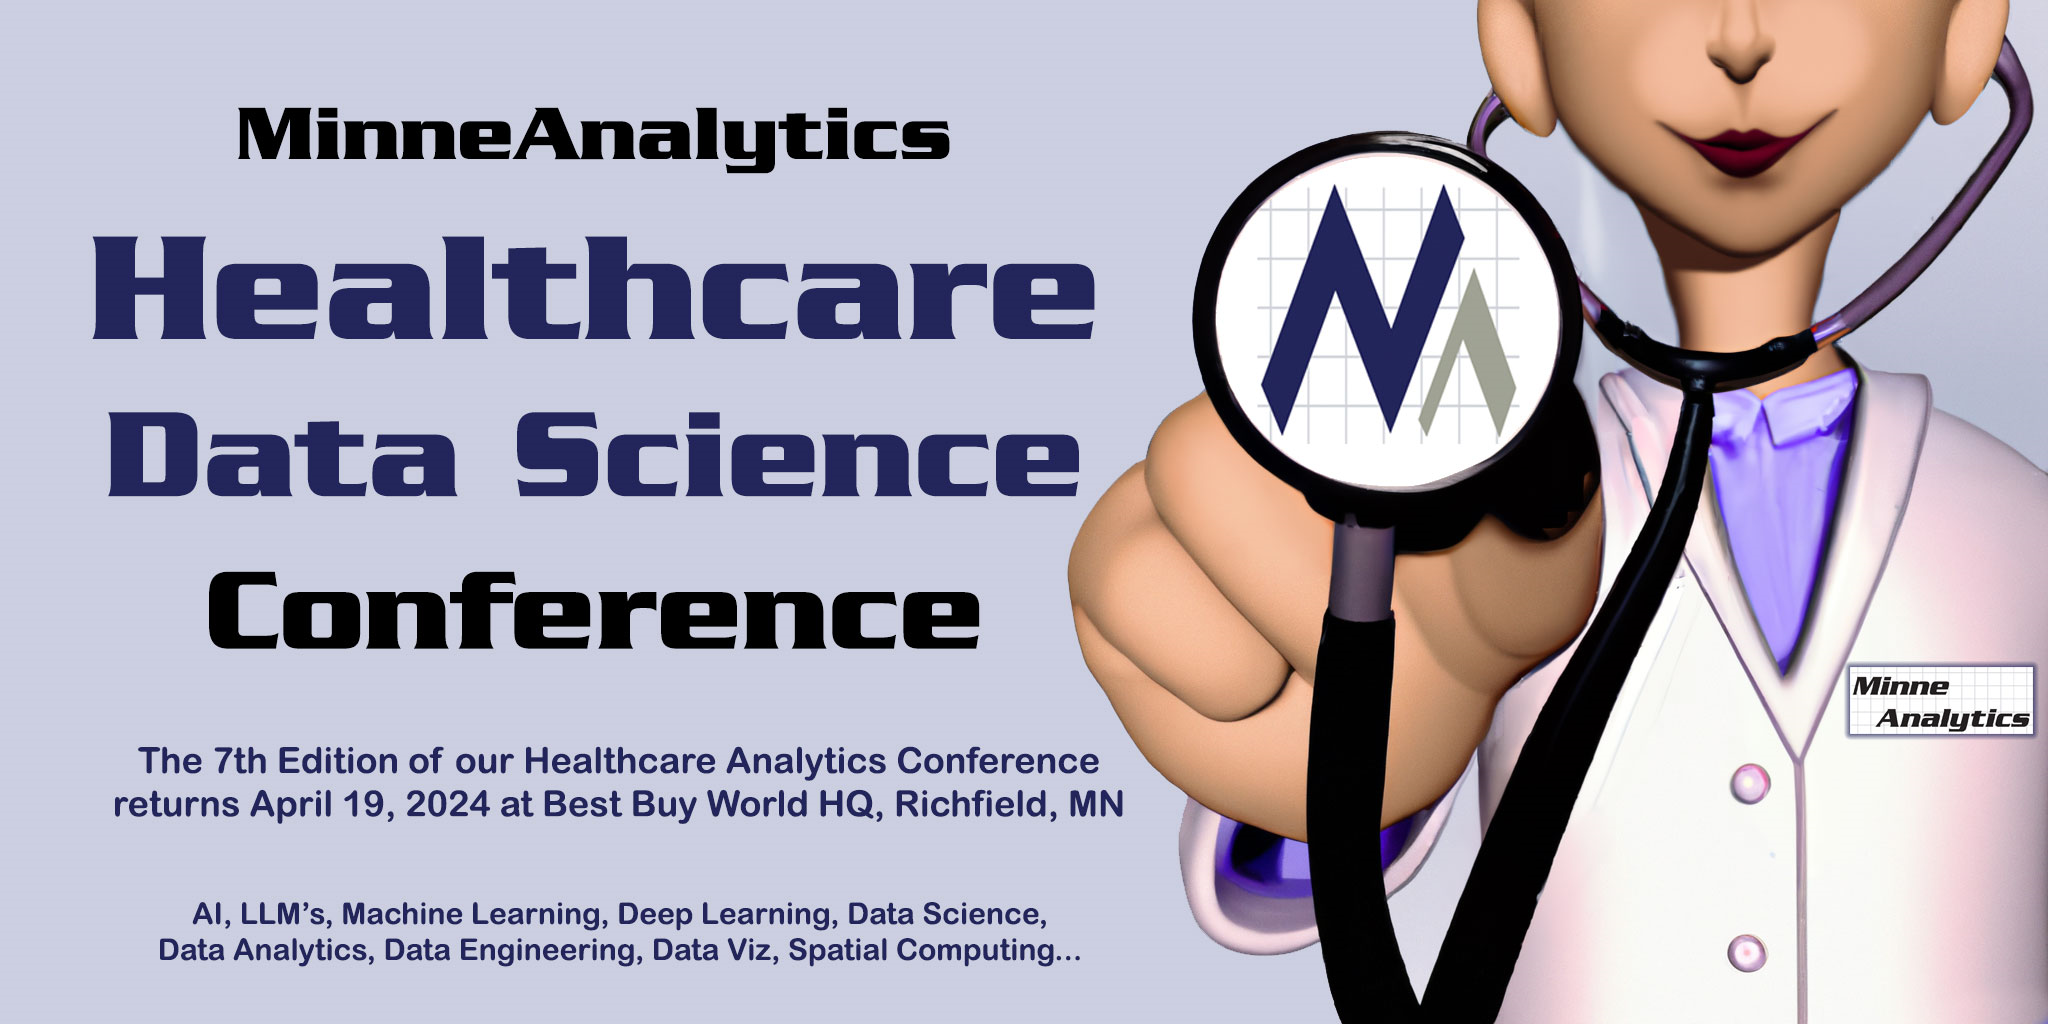 MinneAnalytics Healthcare Data Science Conference The seventh edition of our healthcare analytics conference returns April 19, 2024 at Best Buy World HQ, Richfield, MN